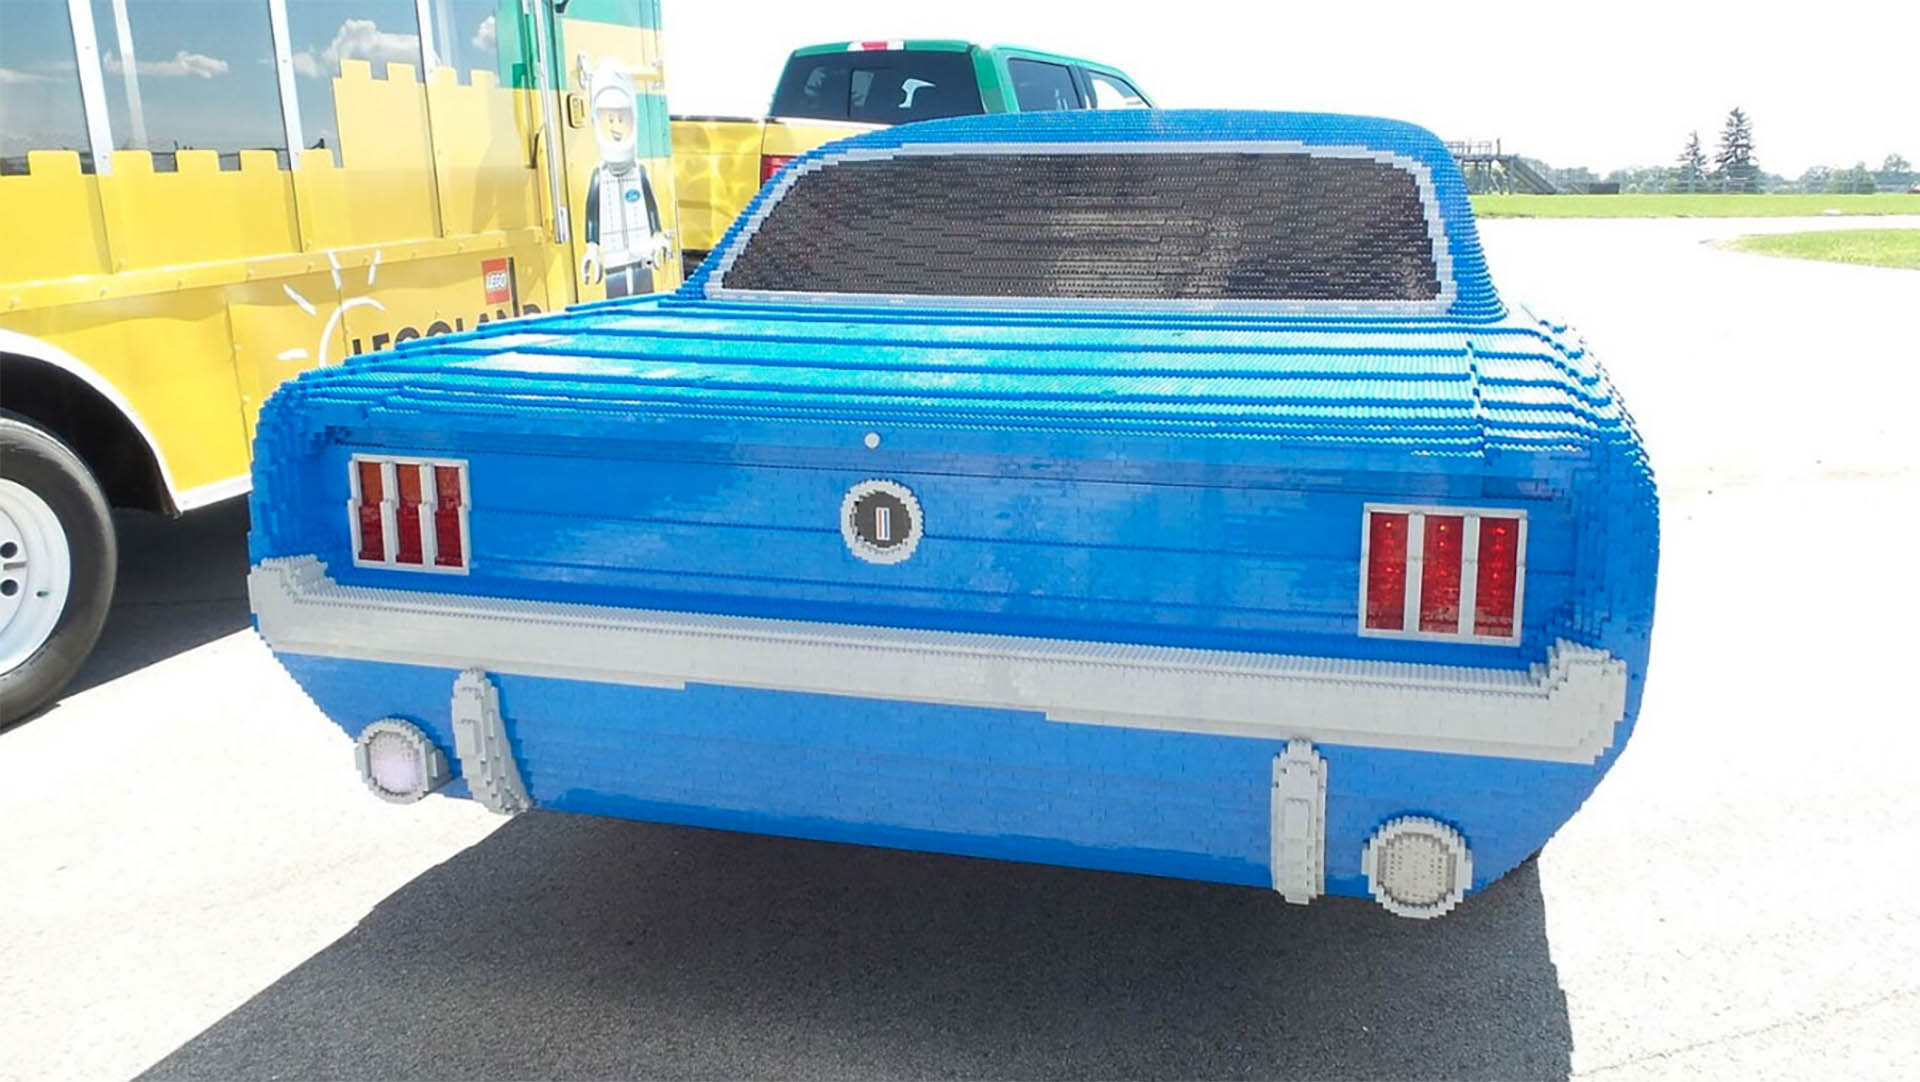 Full-size LEGO Mustang